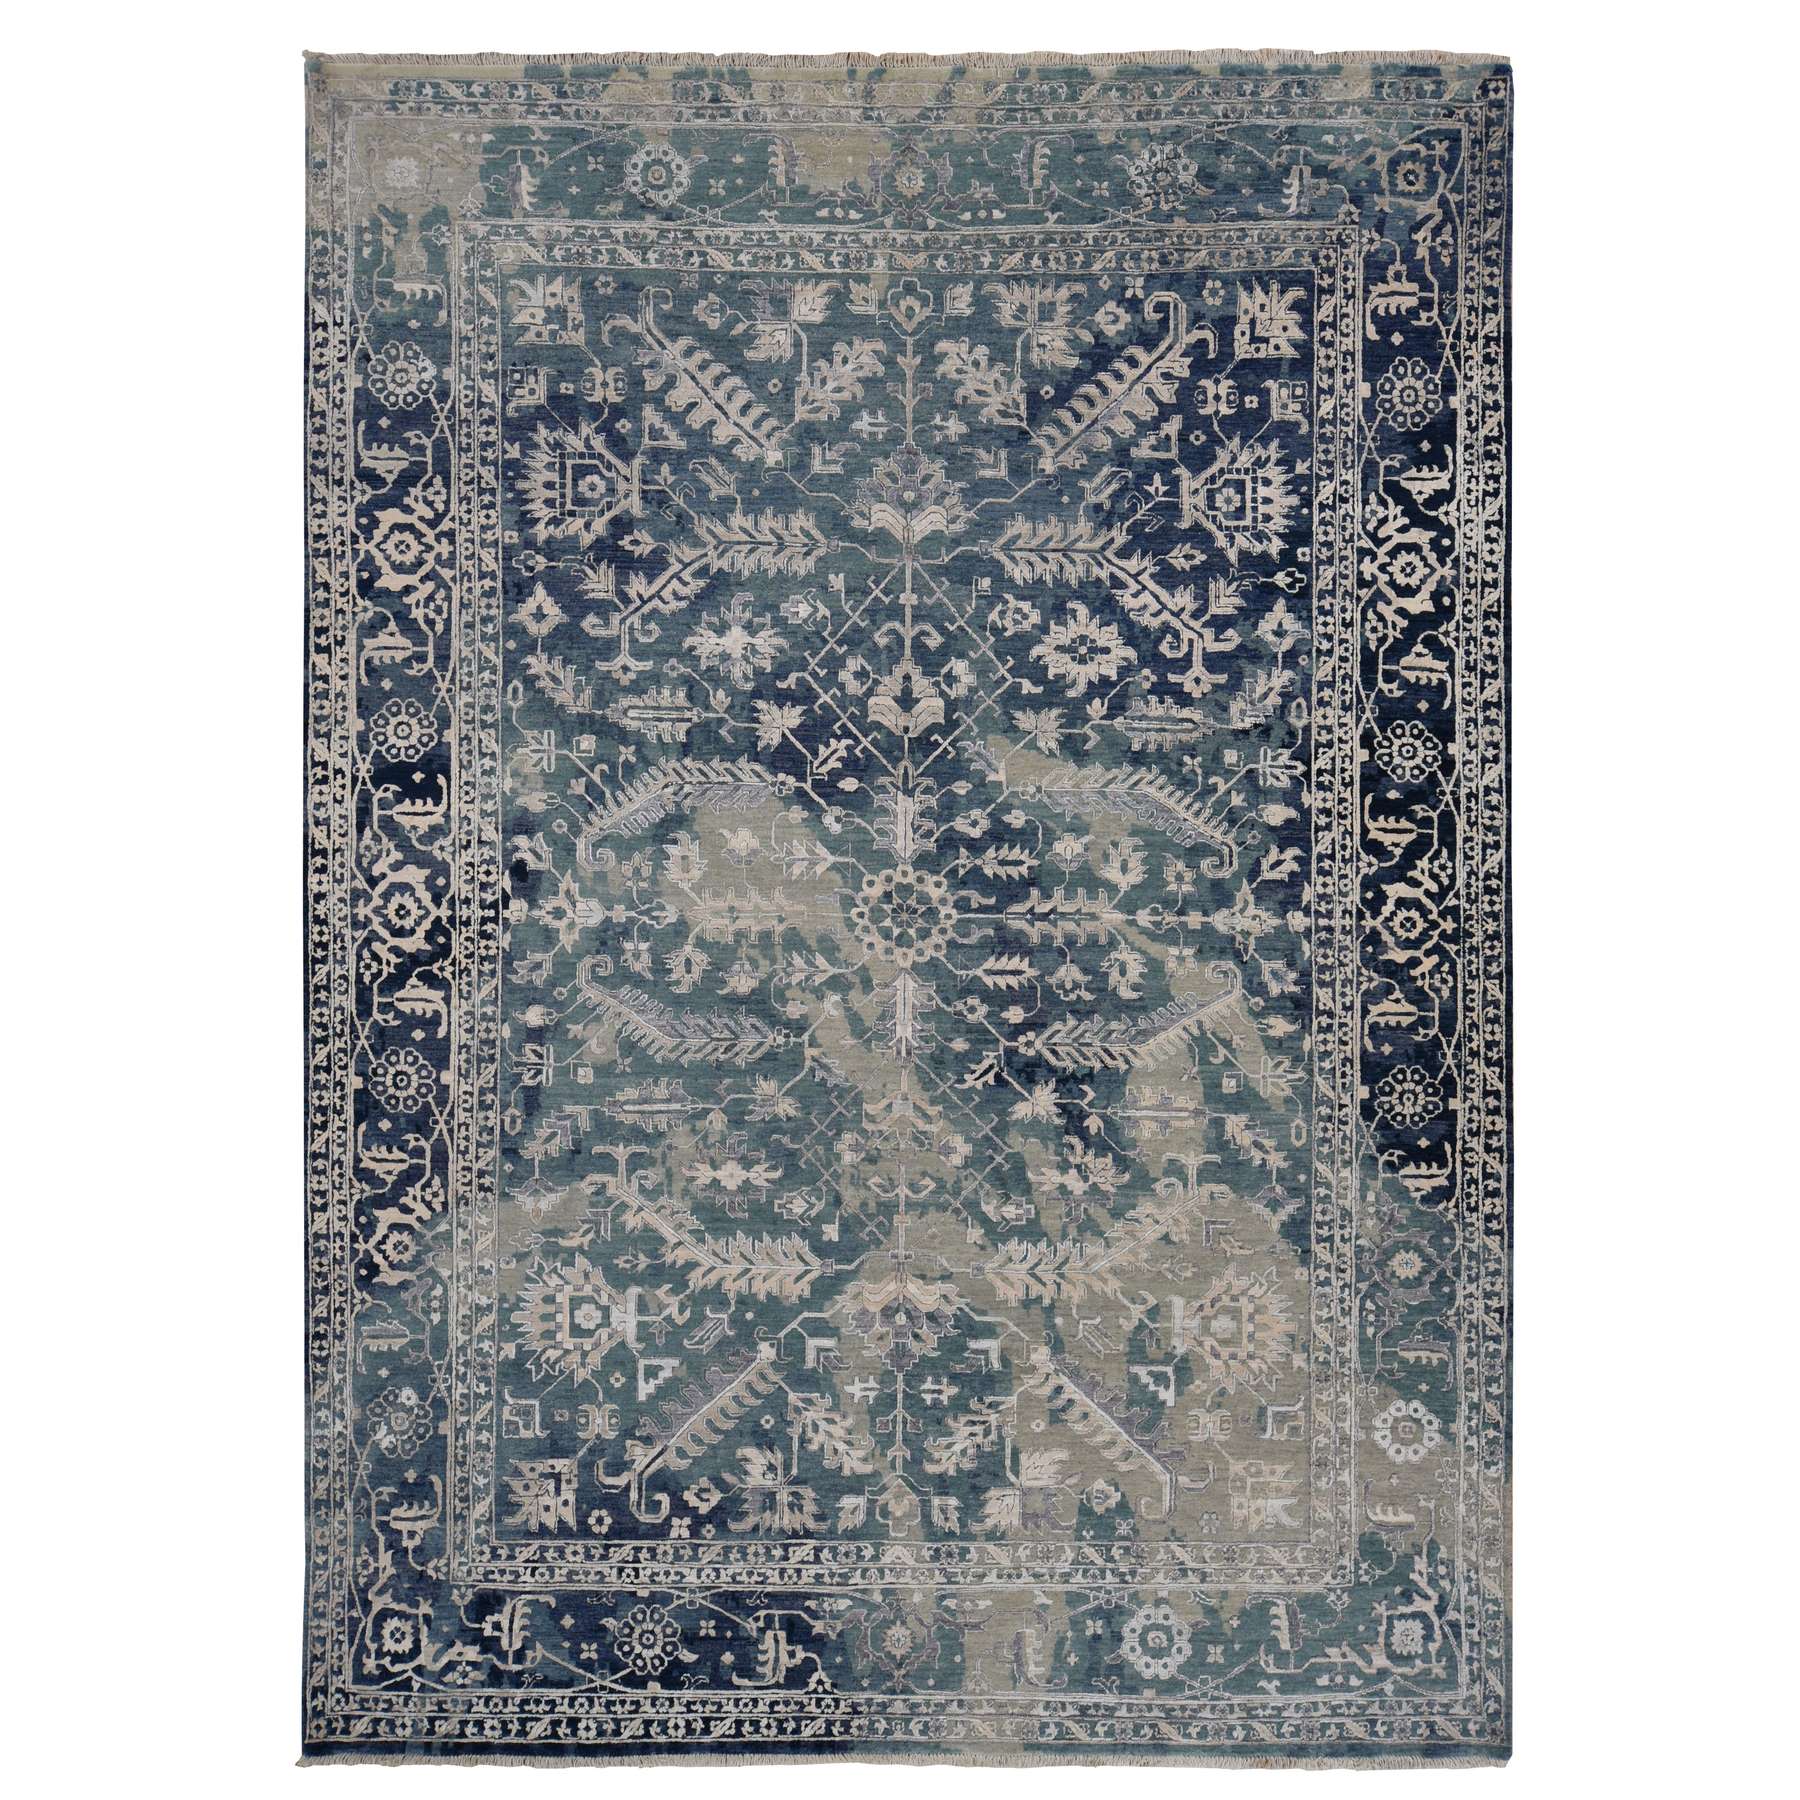  Silk Hand-Knotted Area Rug 9'10